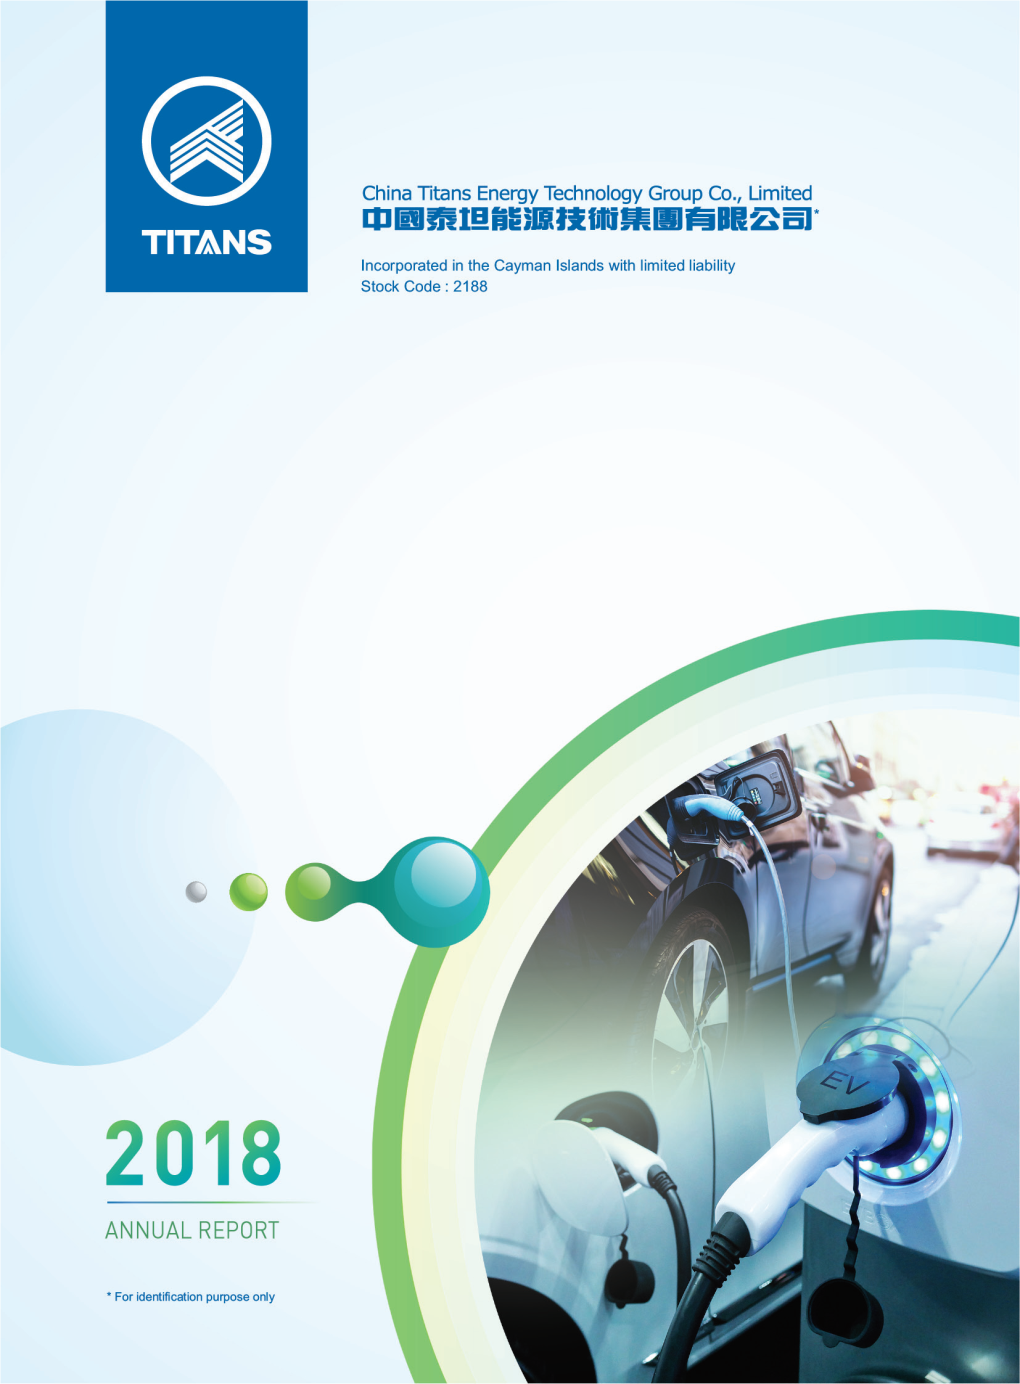 Annual Report 2018 China Titans Energy Technology Group Co., Limited 1